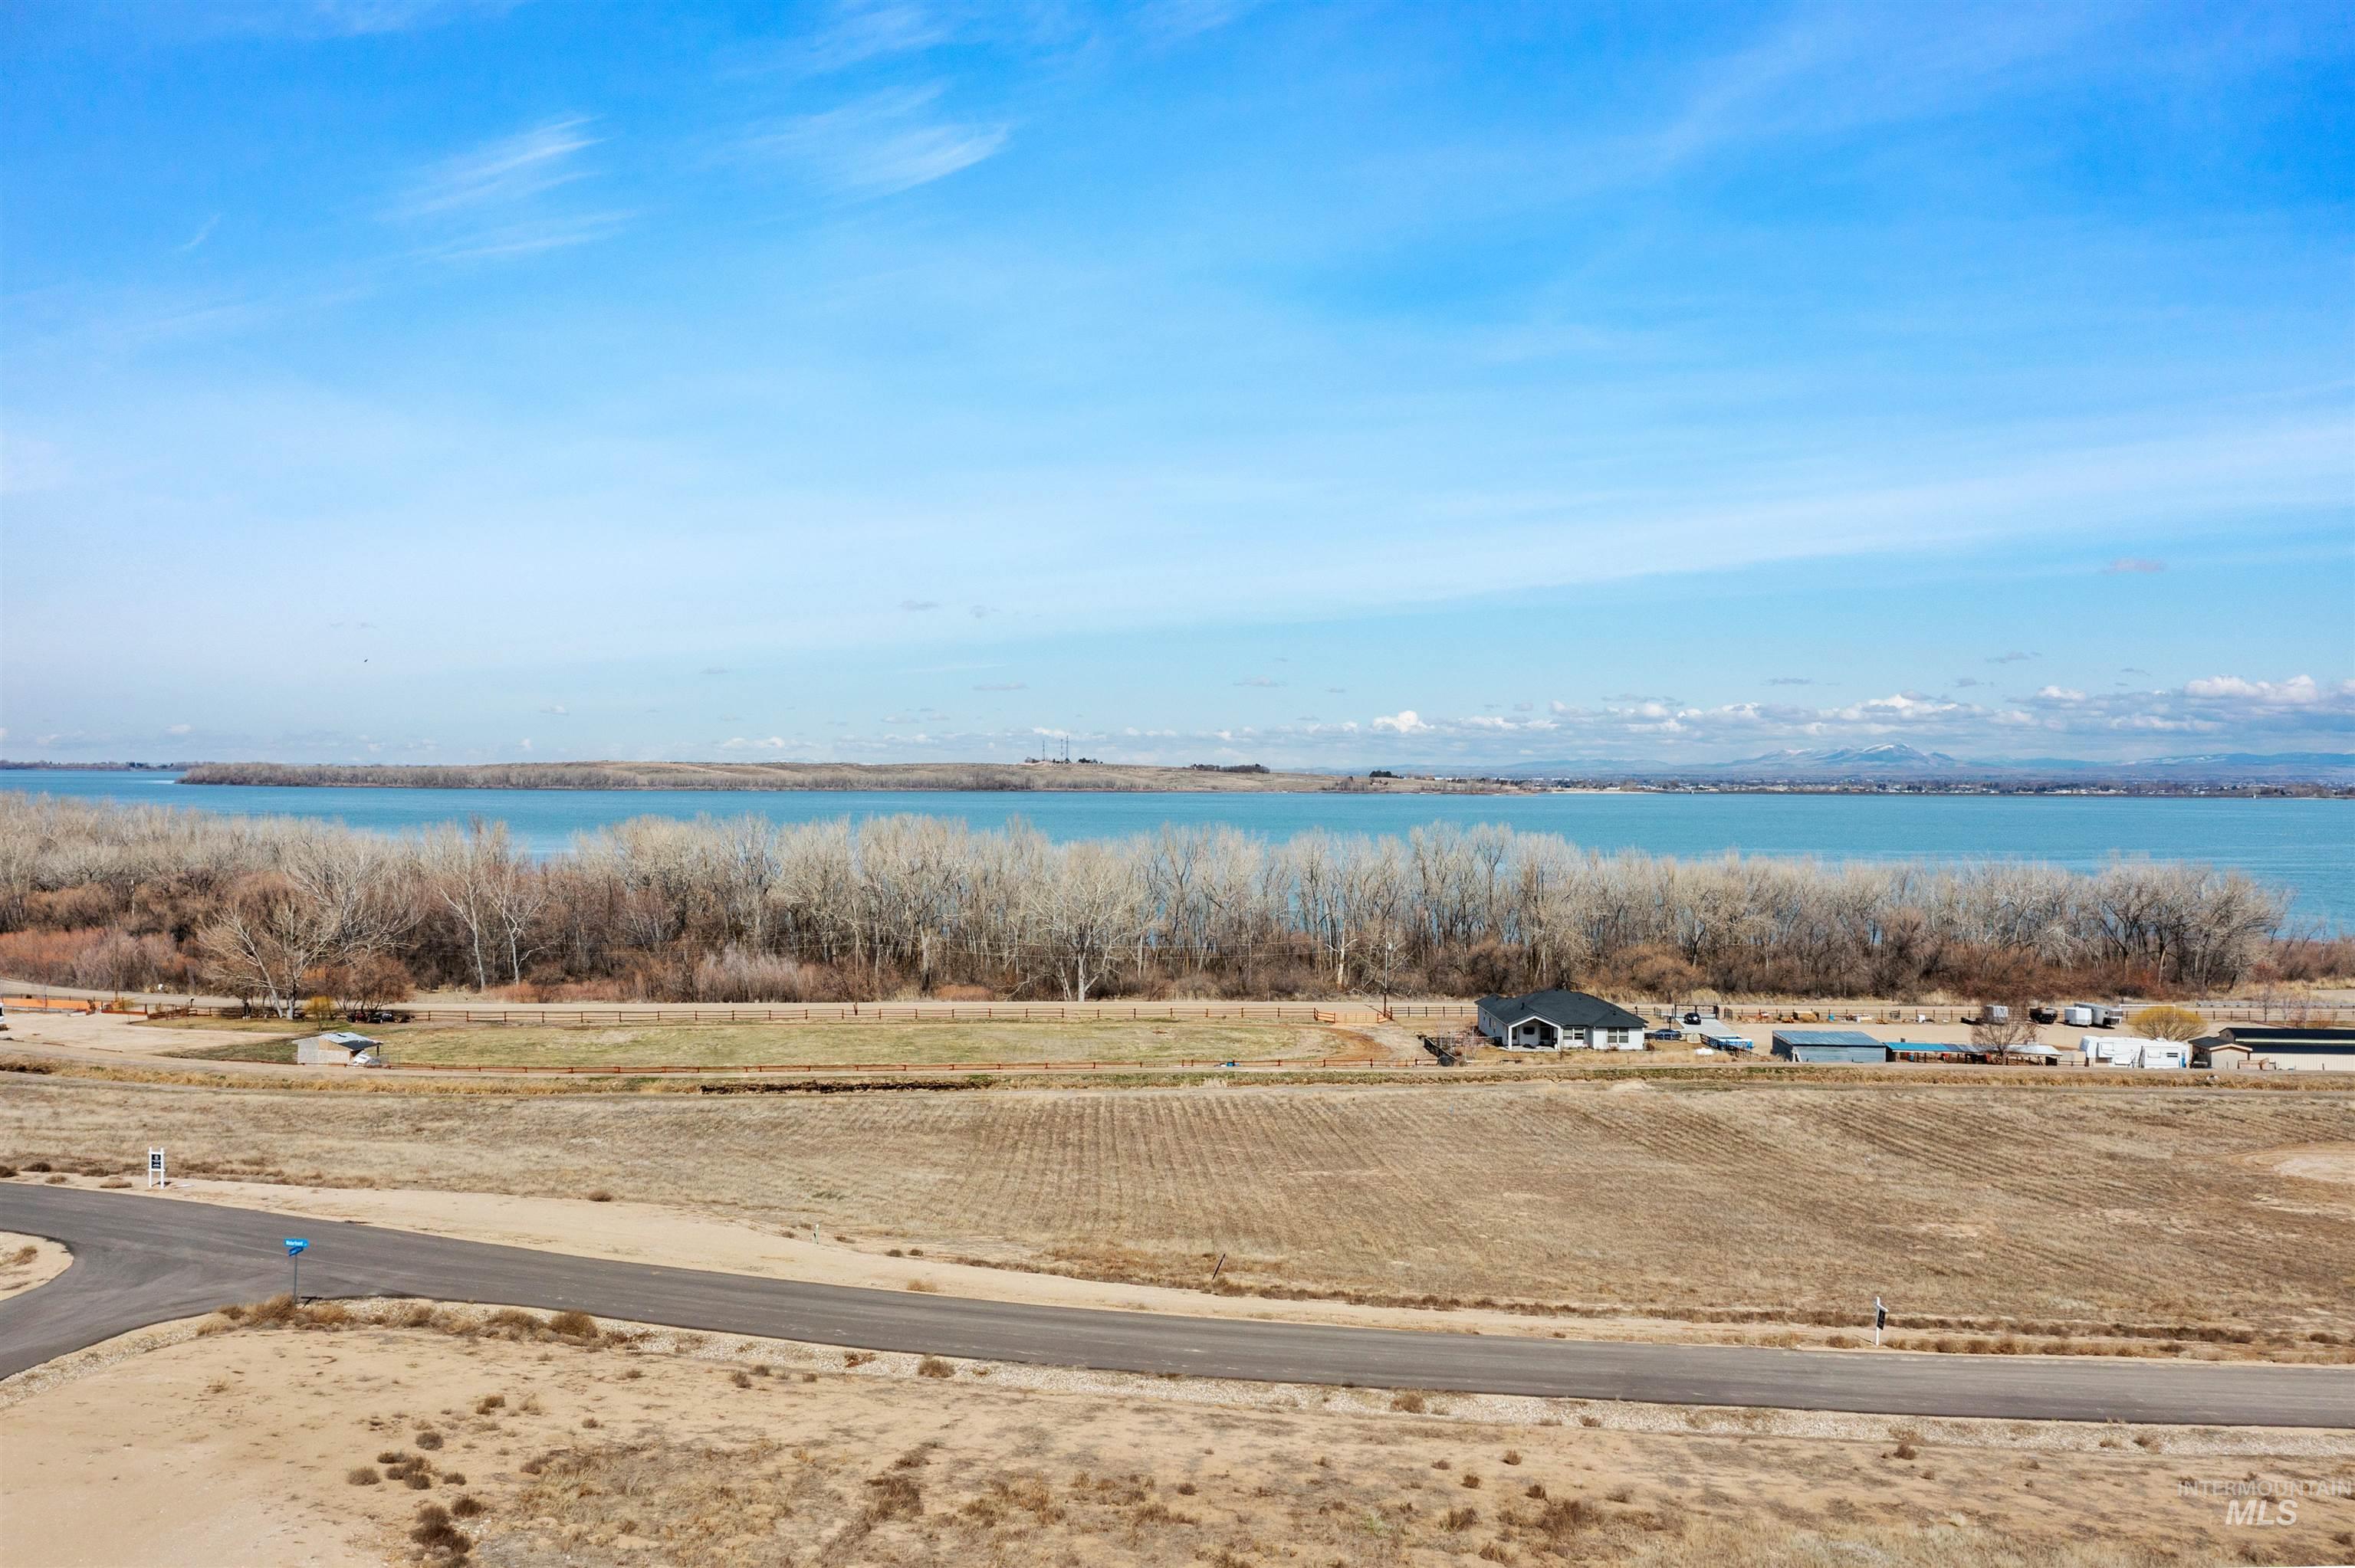 13970 Waterfront Ln., Nampa, Idaho, 83686, United States, 3 Bedrooms Bedrooms, ,3 BathroomsBathrooms,Residential,For Sale,13970 Waterfront Ln.,1492406